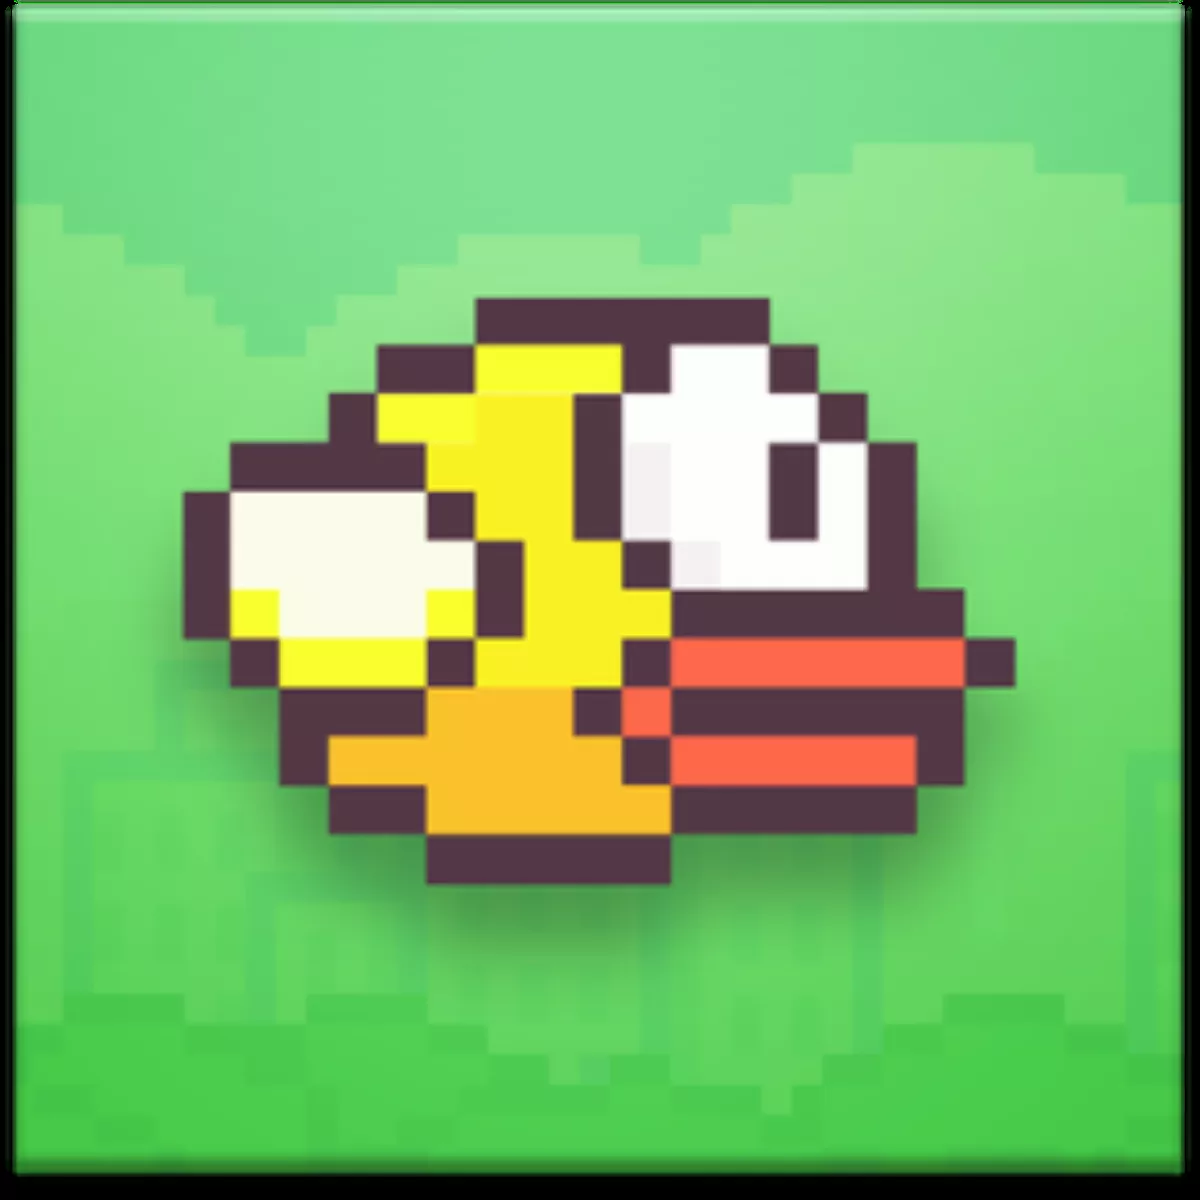 10 Facts About the Frustrating Flappy Bird Game - The Fact Site